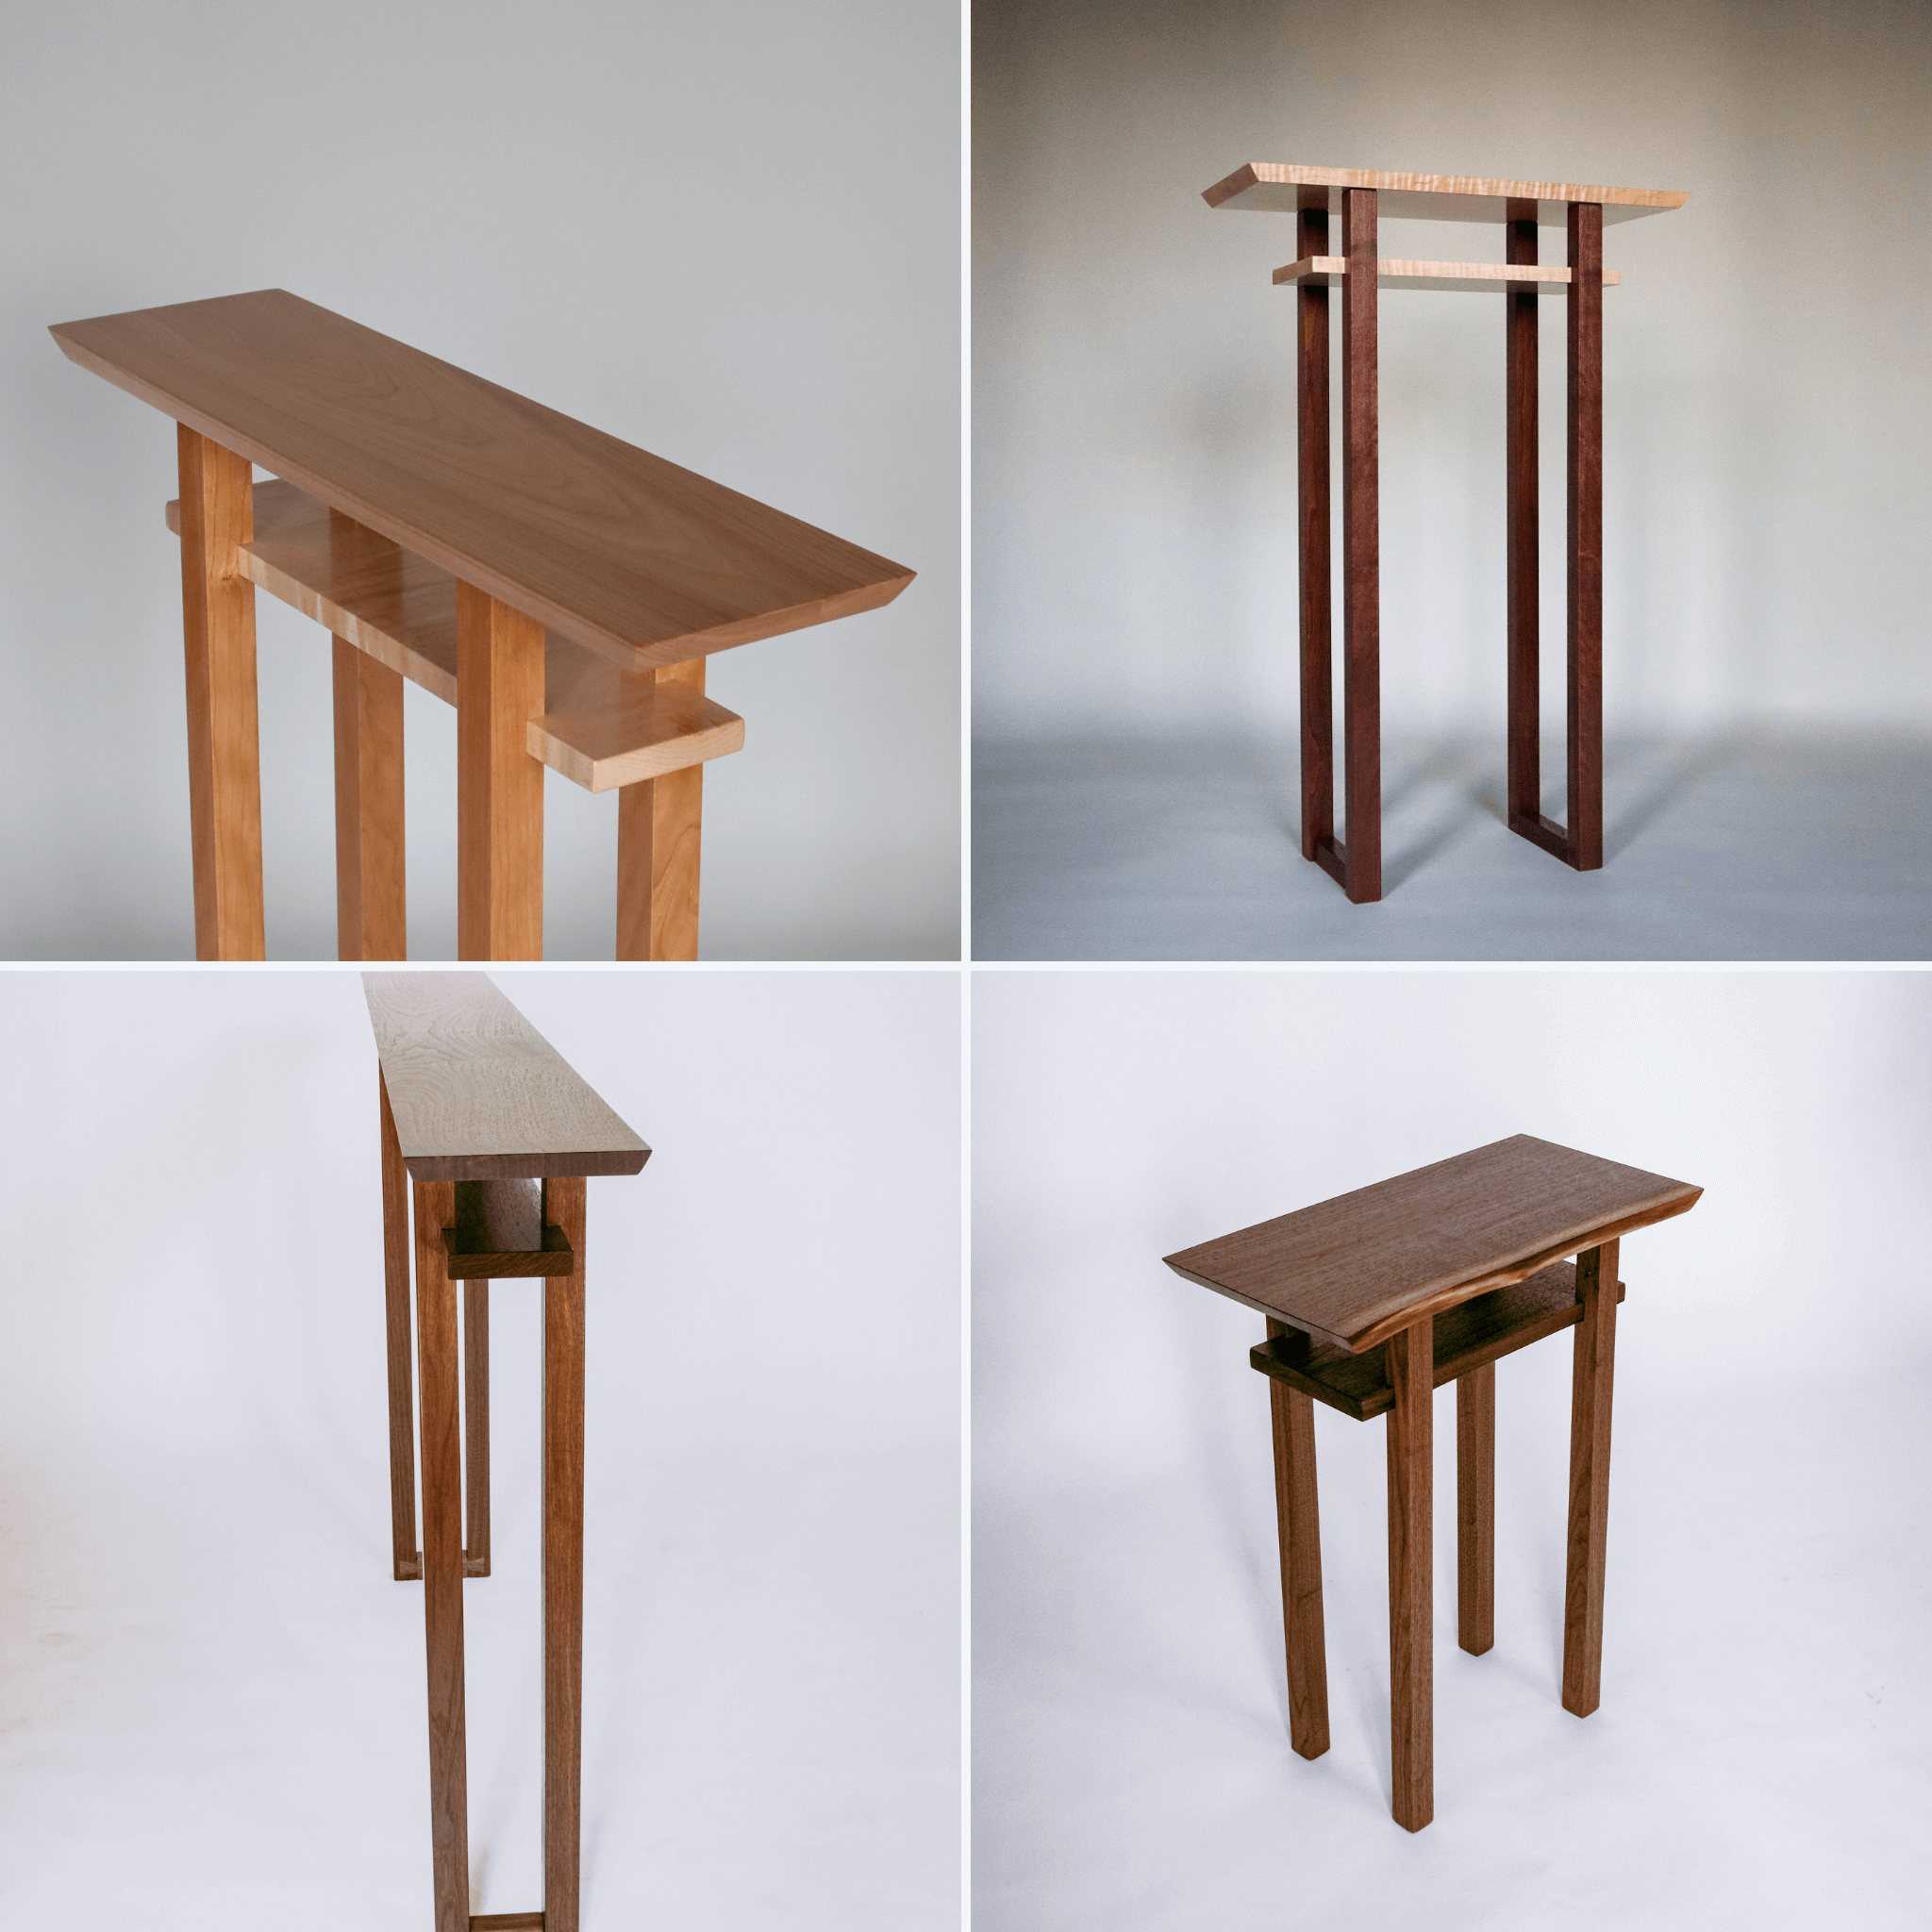 You can customize the size of your new modern wood table with Mokuzai Furniture.